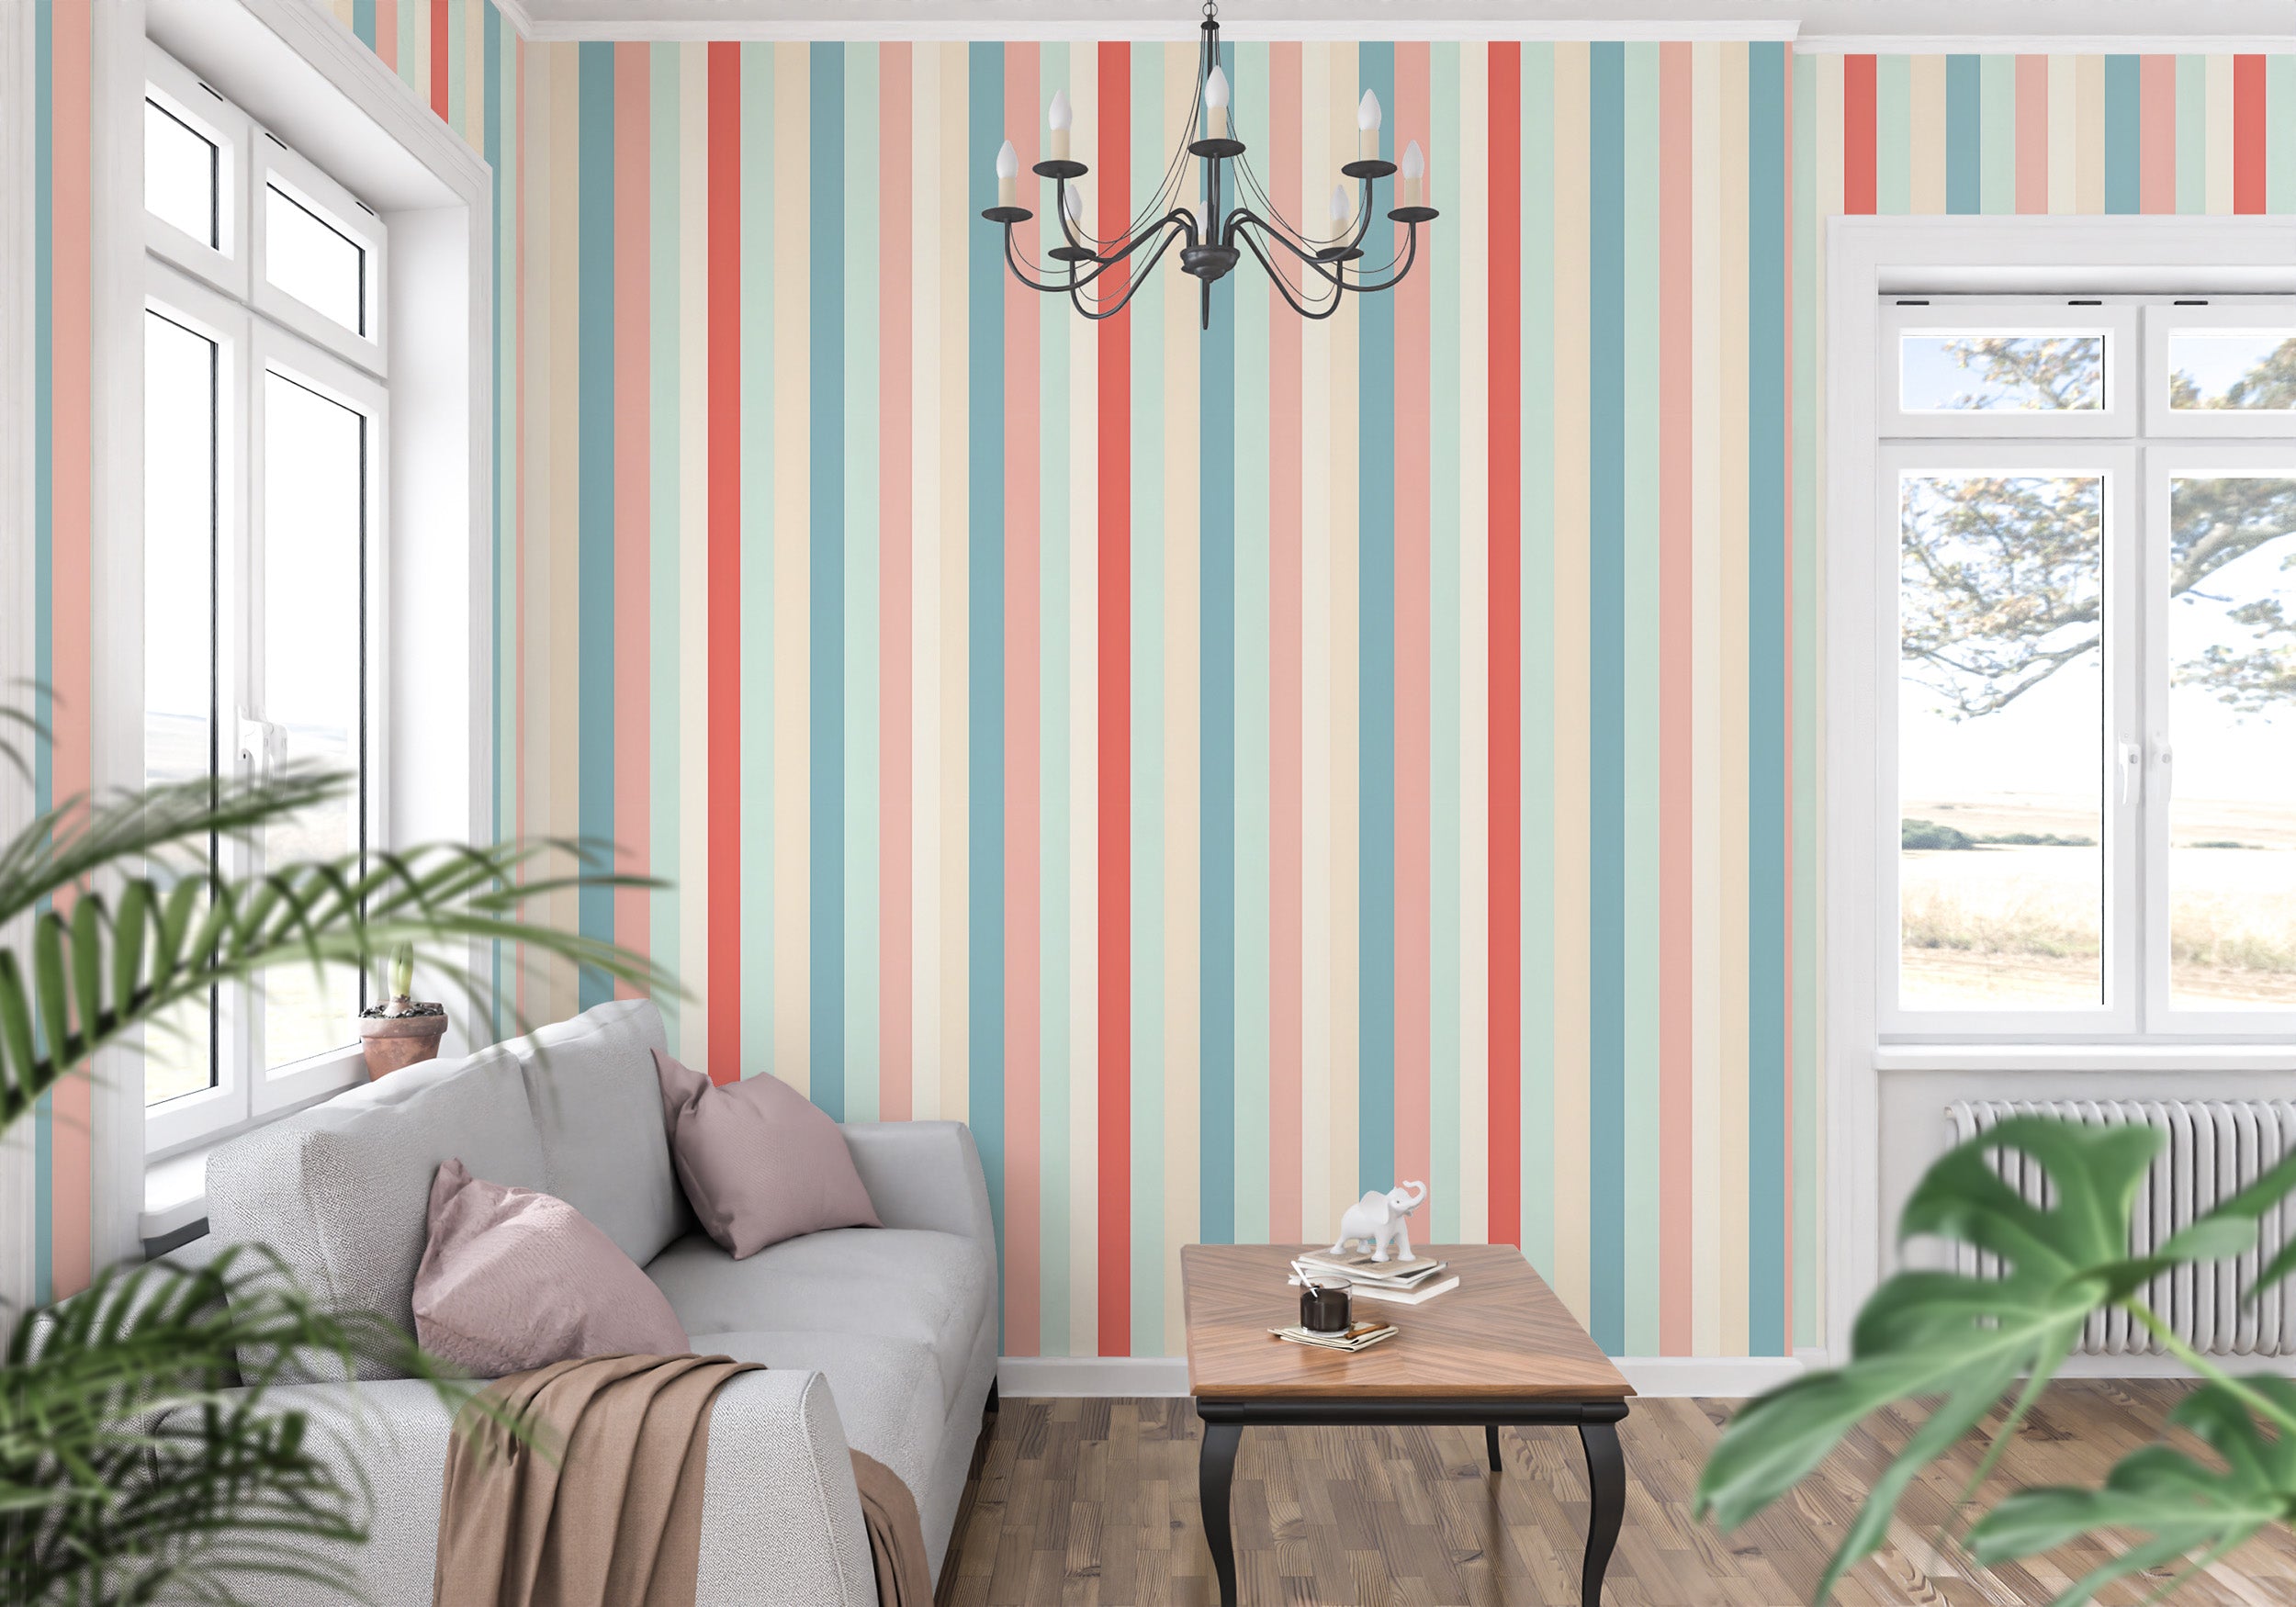 Transform Your Room with Colorful Striped Wallpaper